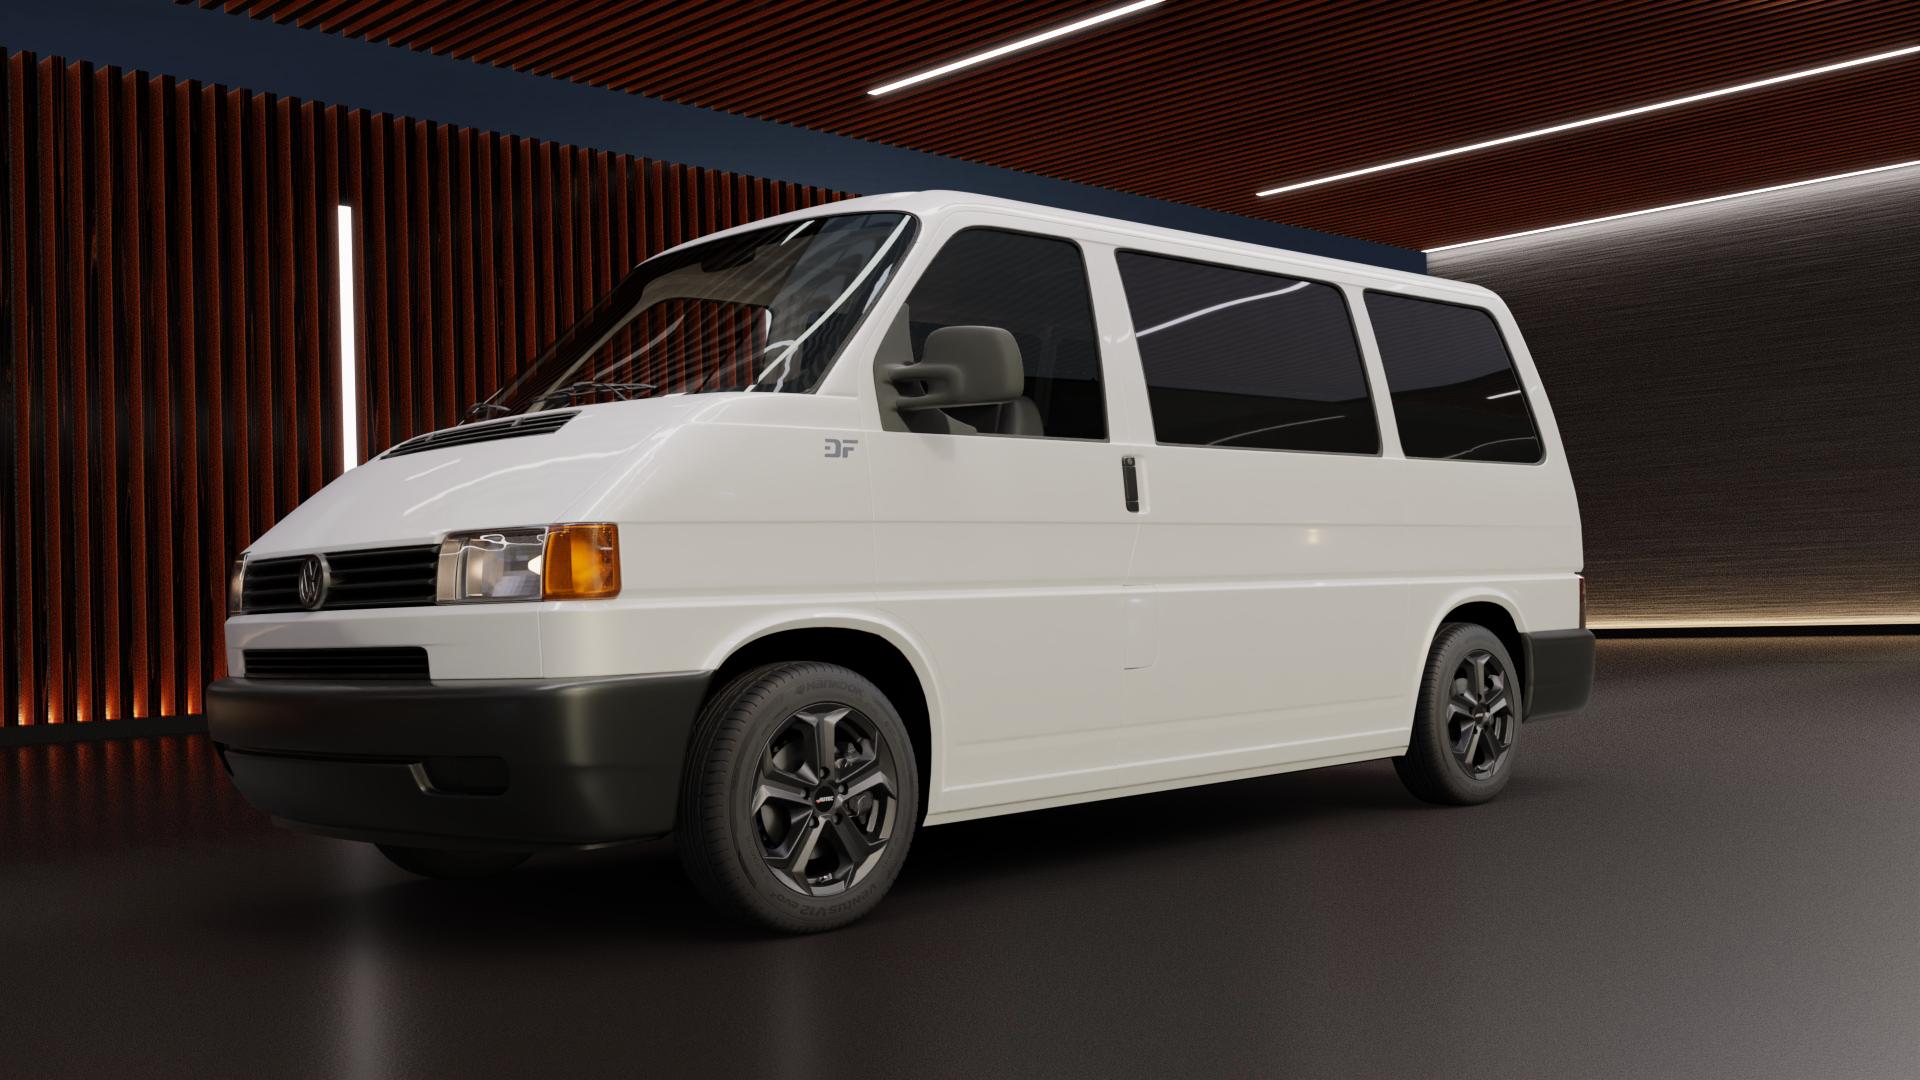 Volkswagen (VW) T4 Caravelle 1,9l TD 50kW (68 hp) Wheels and Tyre Packages  | velonity.com